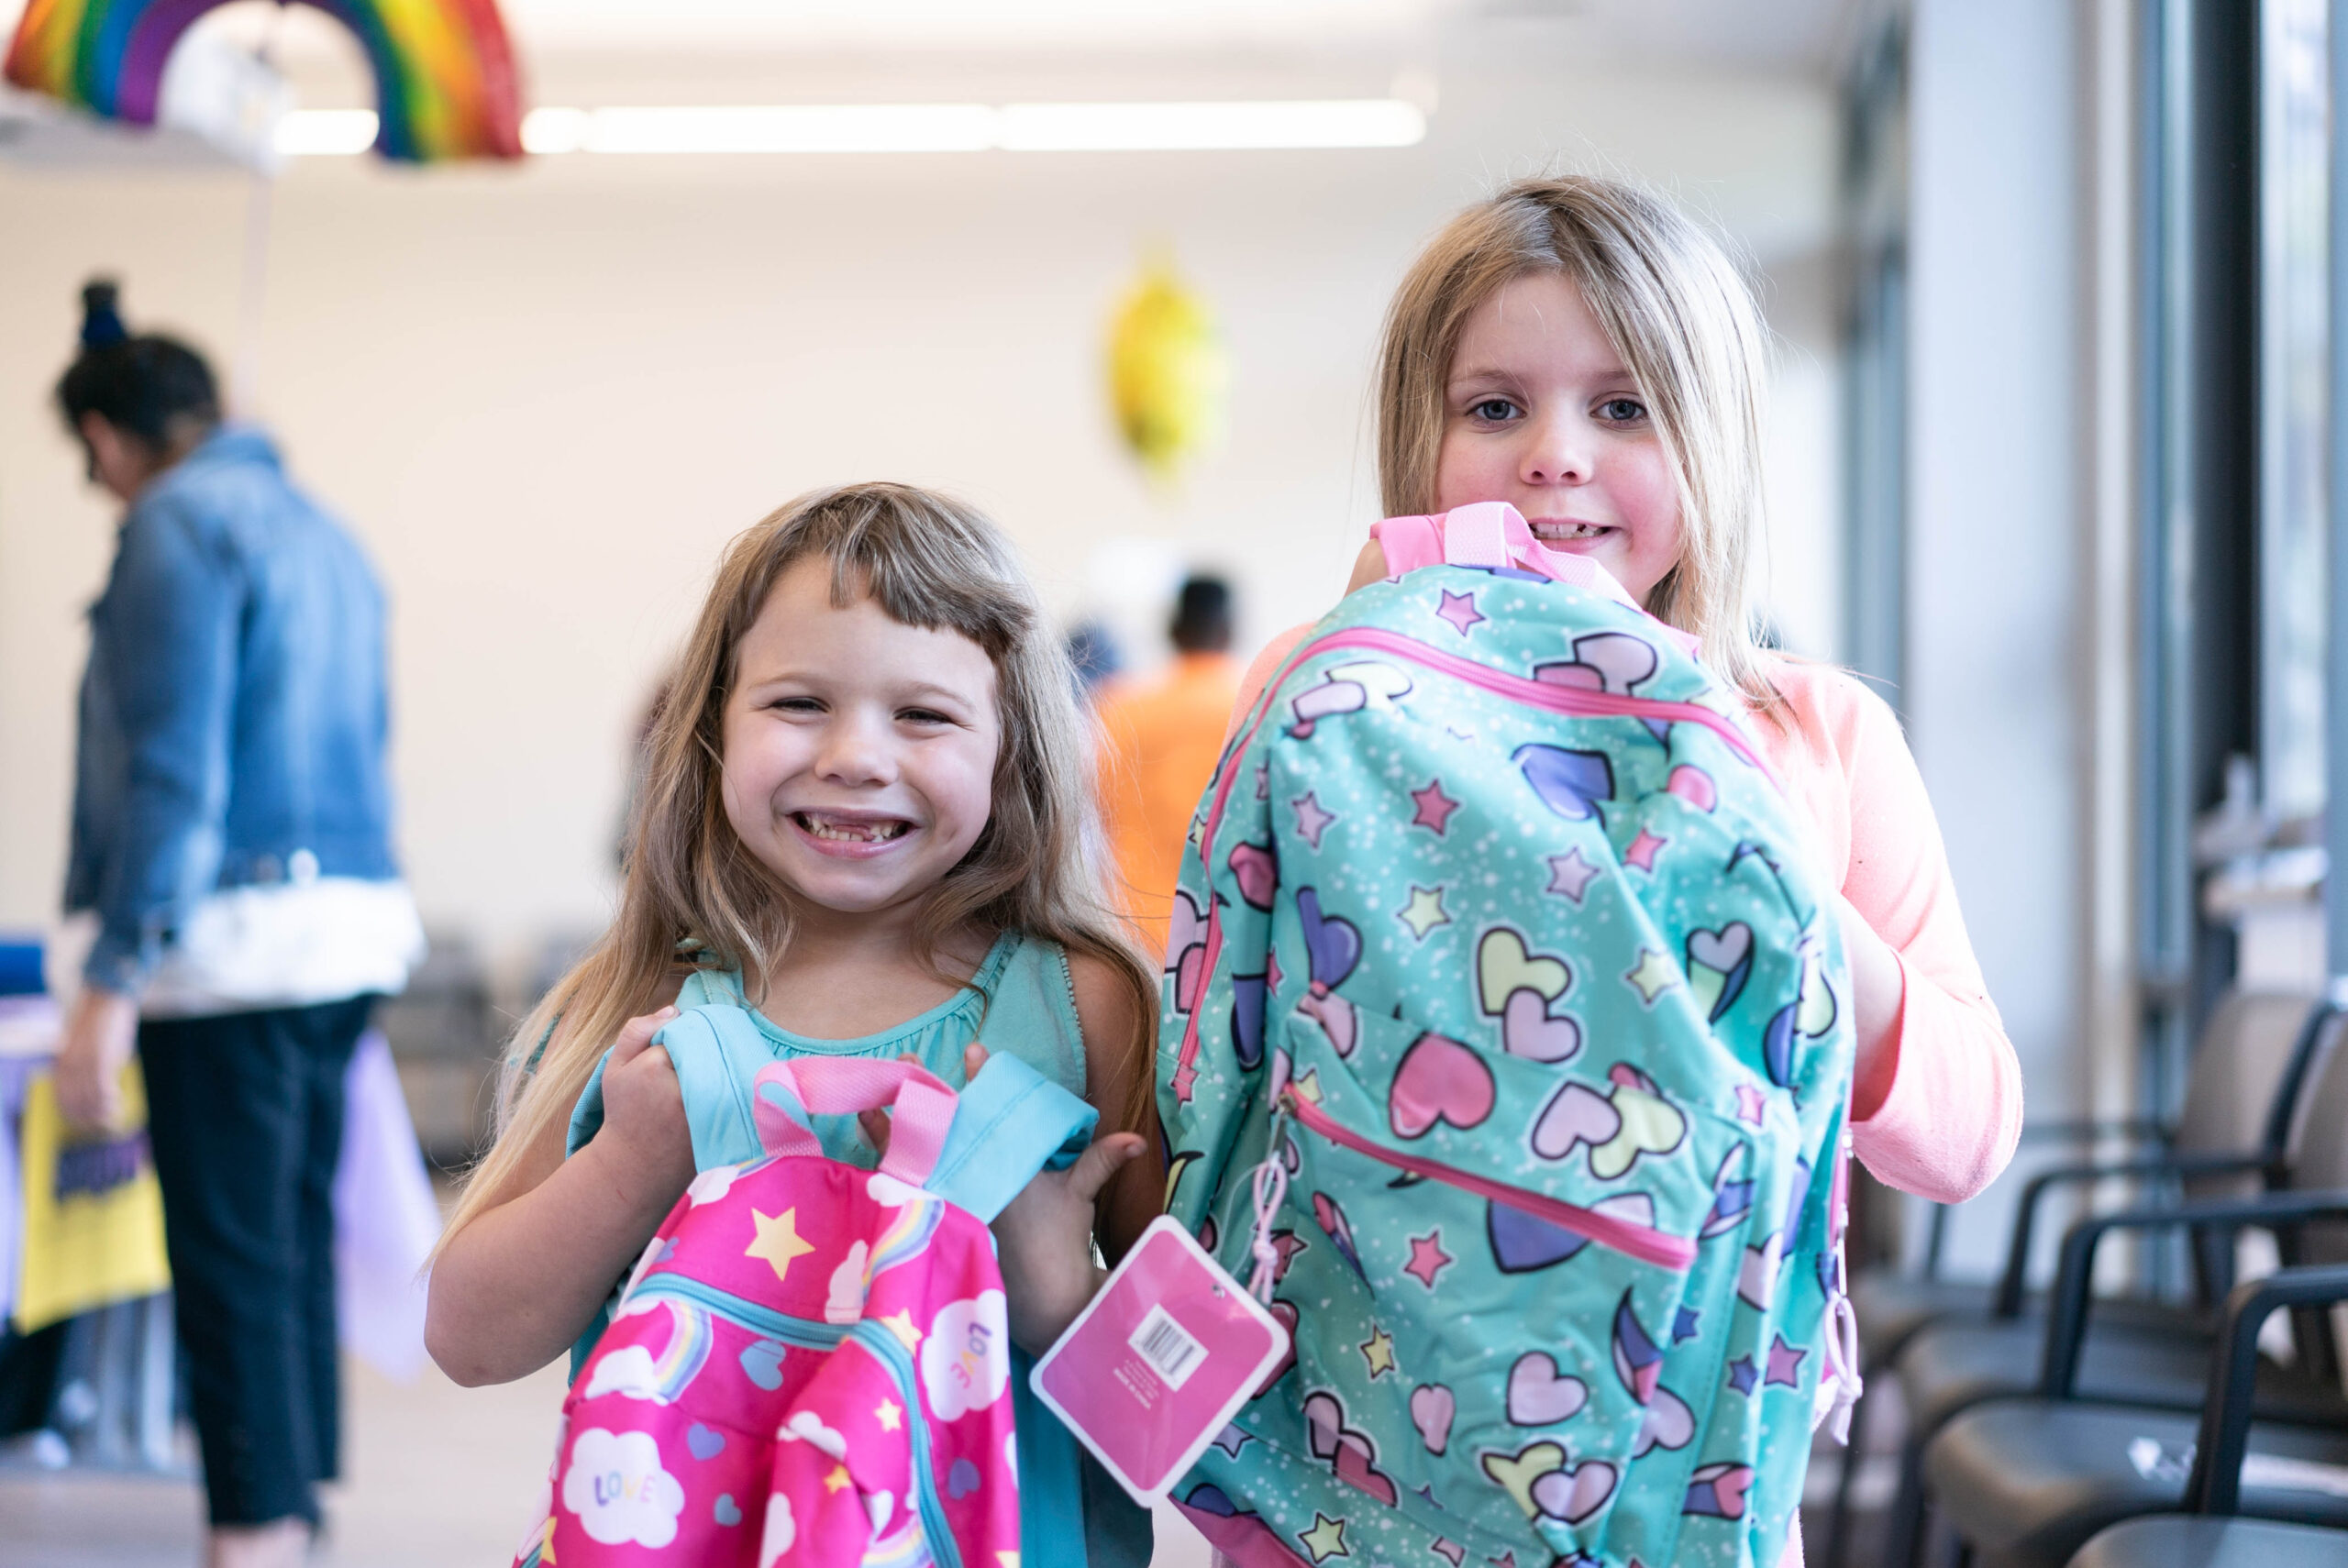 Two young girls hold up backpacks